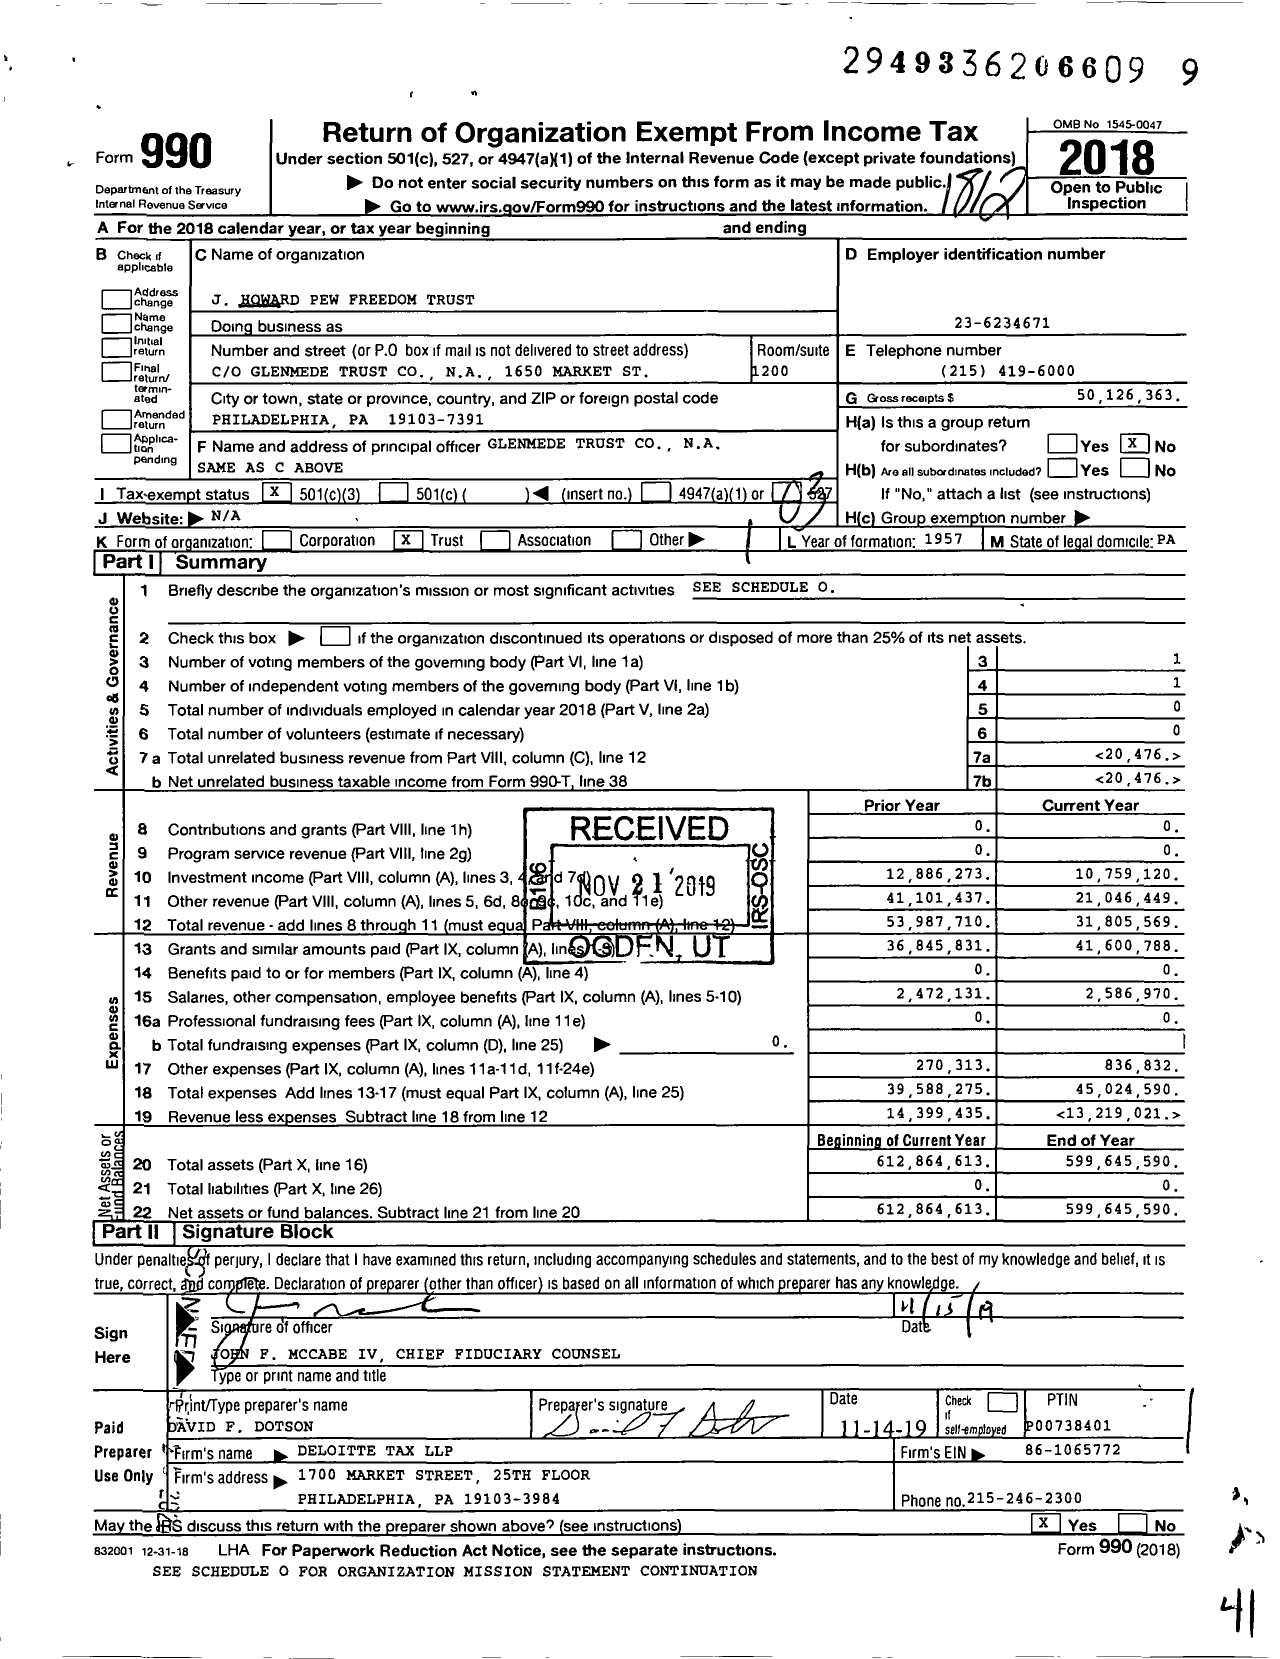 Image of first page of 2018 Form 990 for J. Howard Pew Freedom Trust